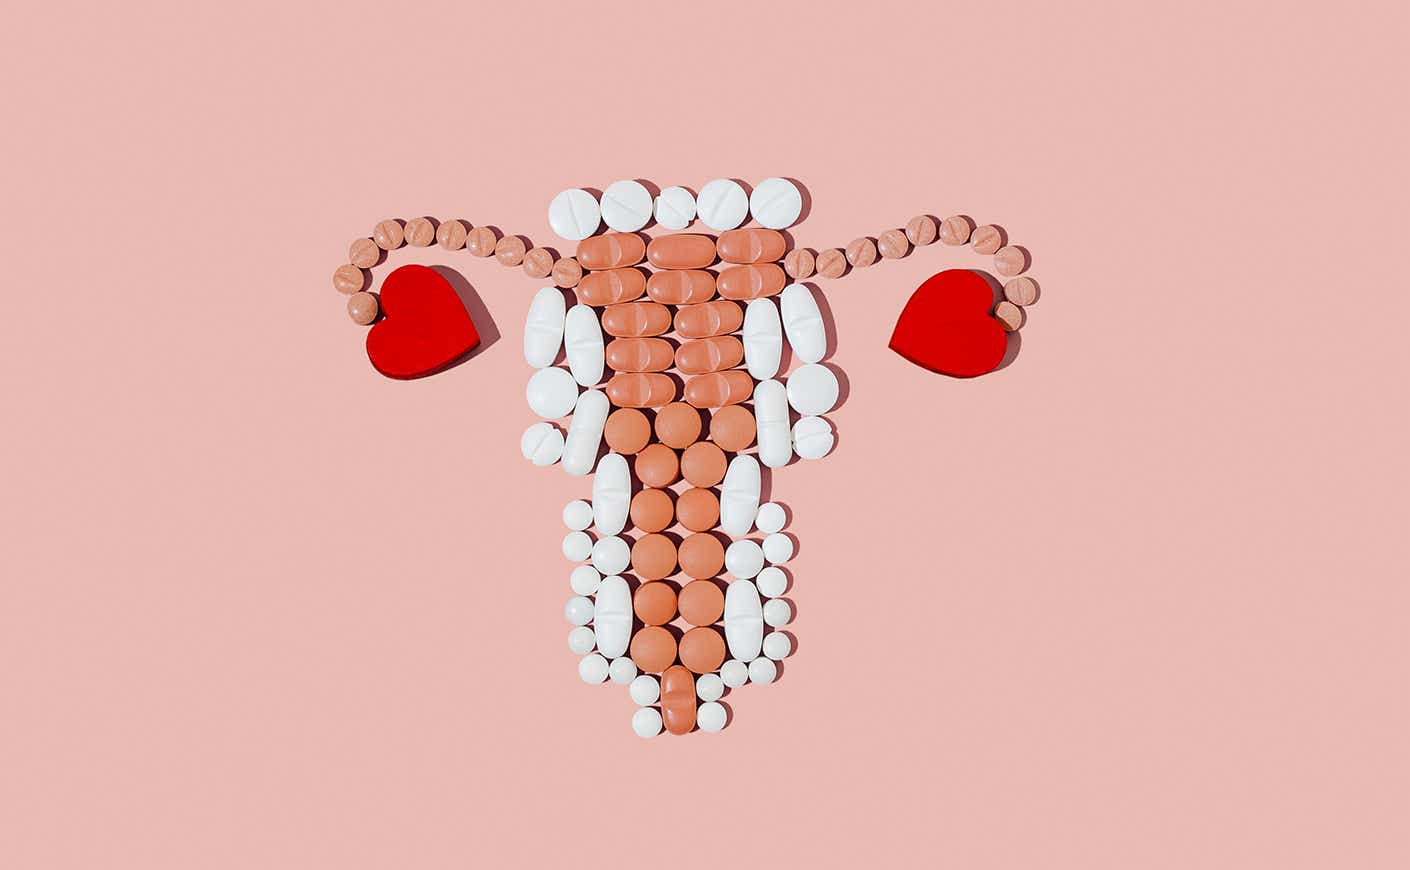 brown and white pills arranged in the shape of a uterus